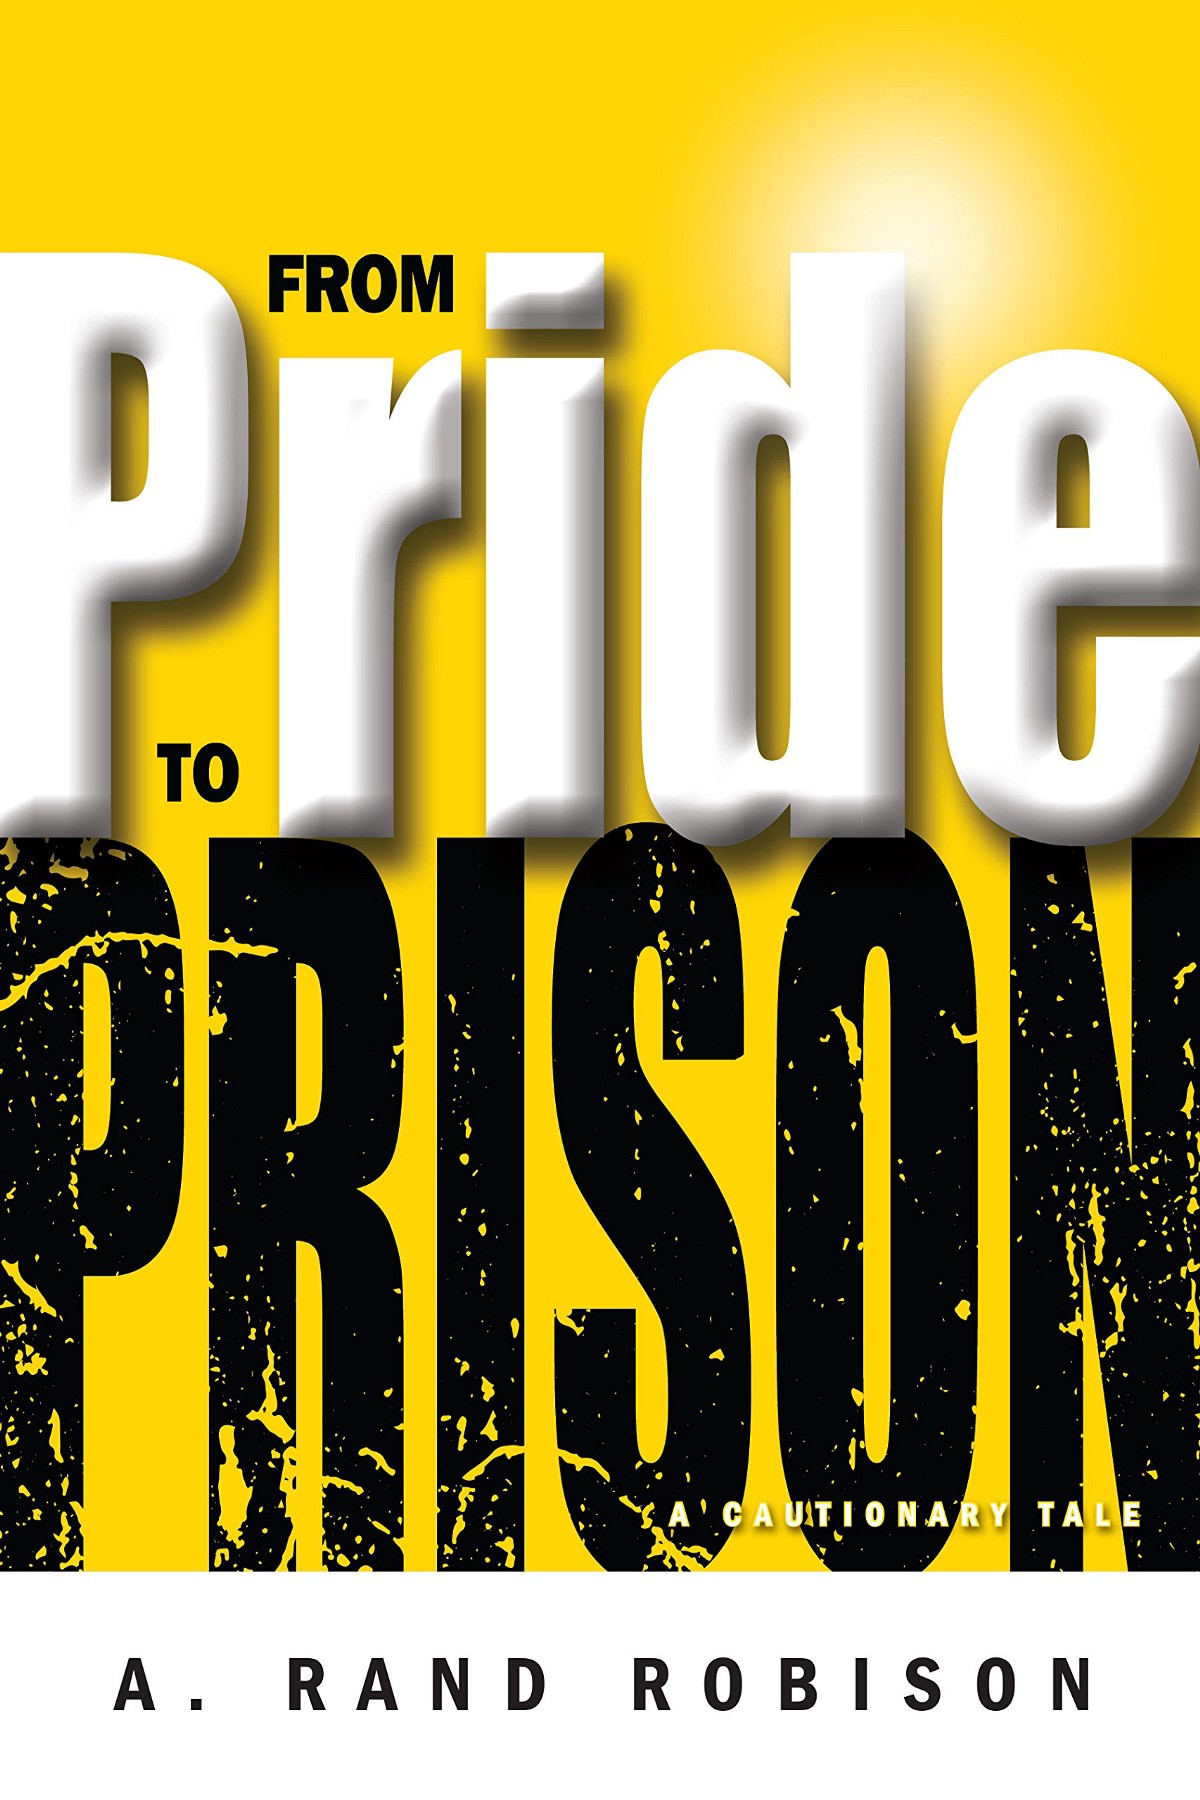 From Pride to Prison – Personal Experience of Rexburg Entrepreneur Rand Robison